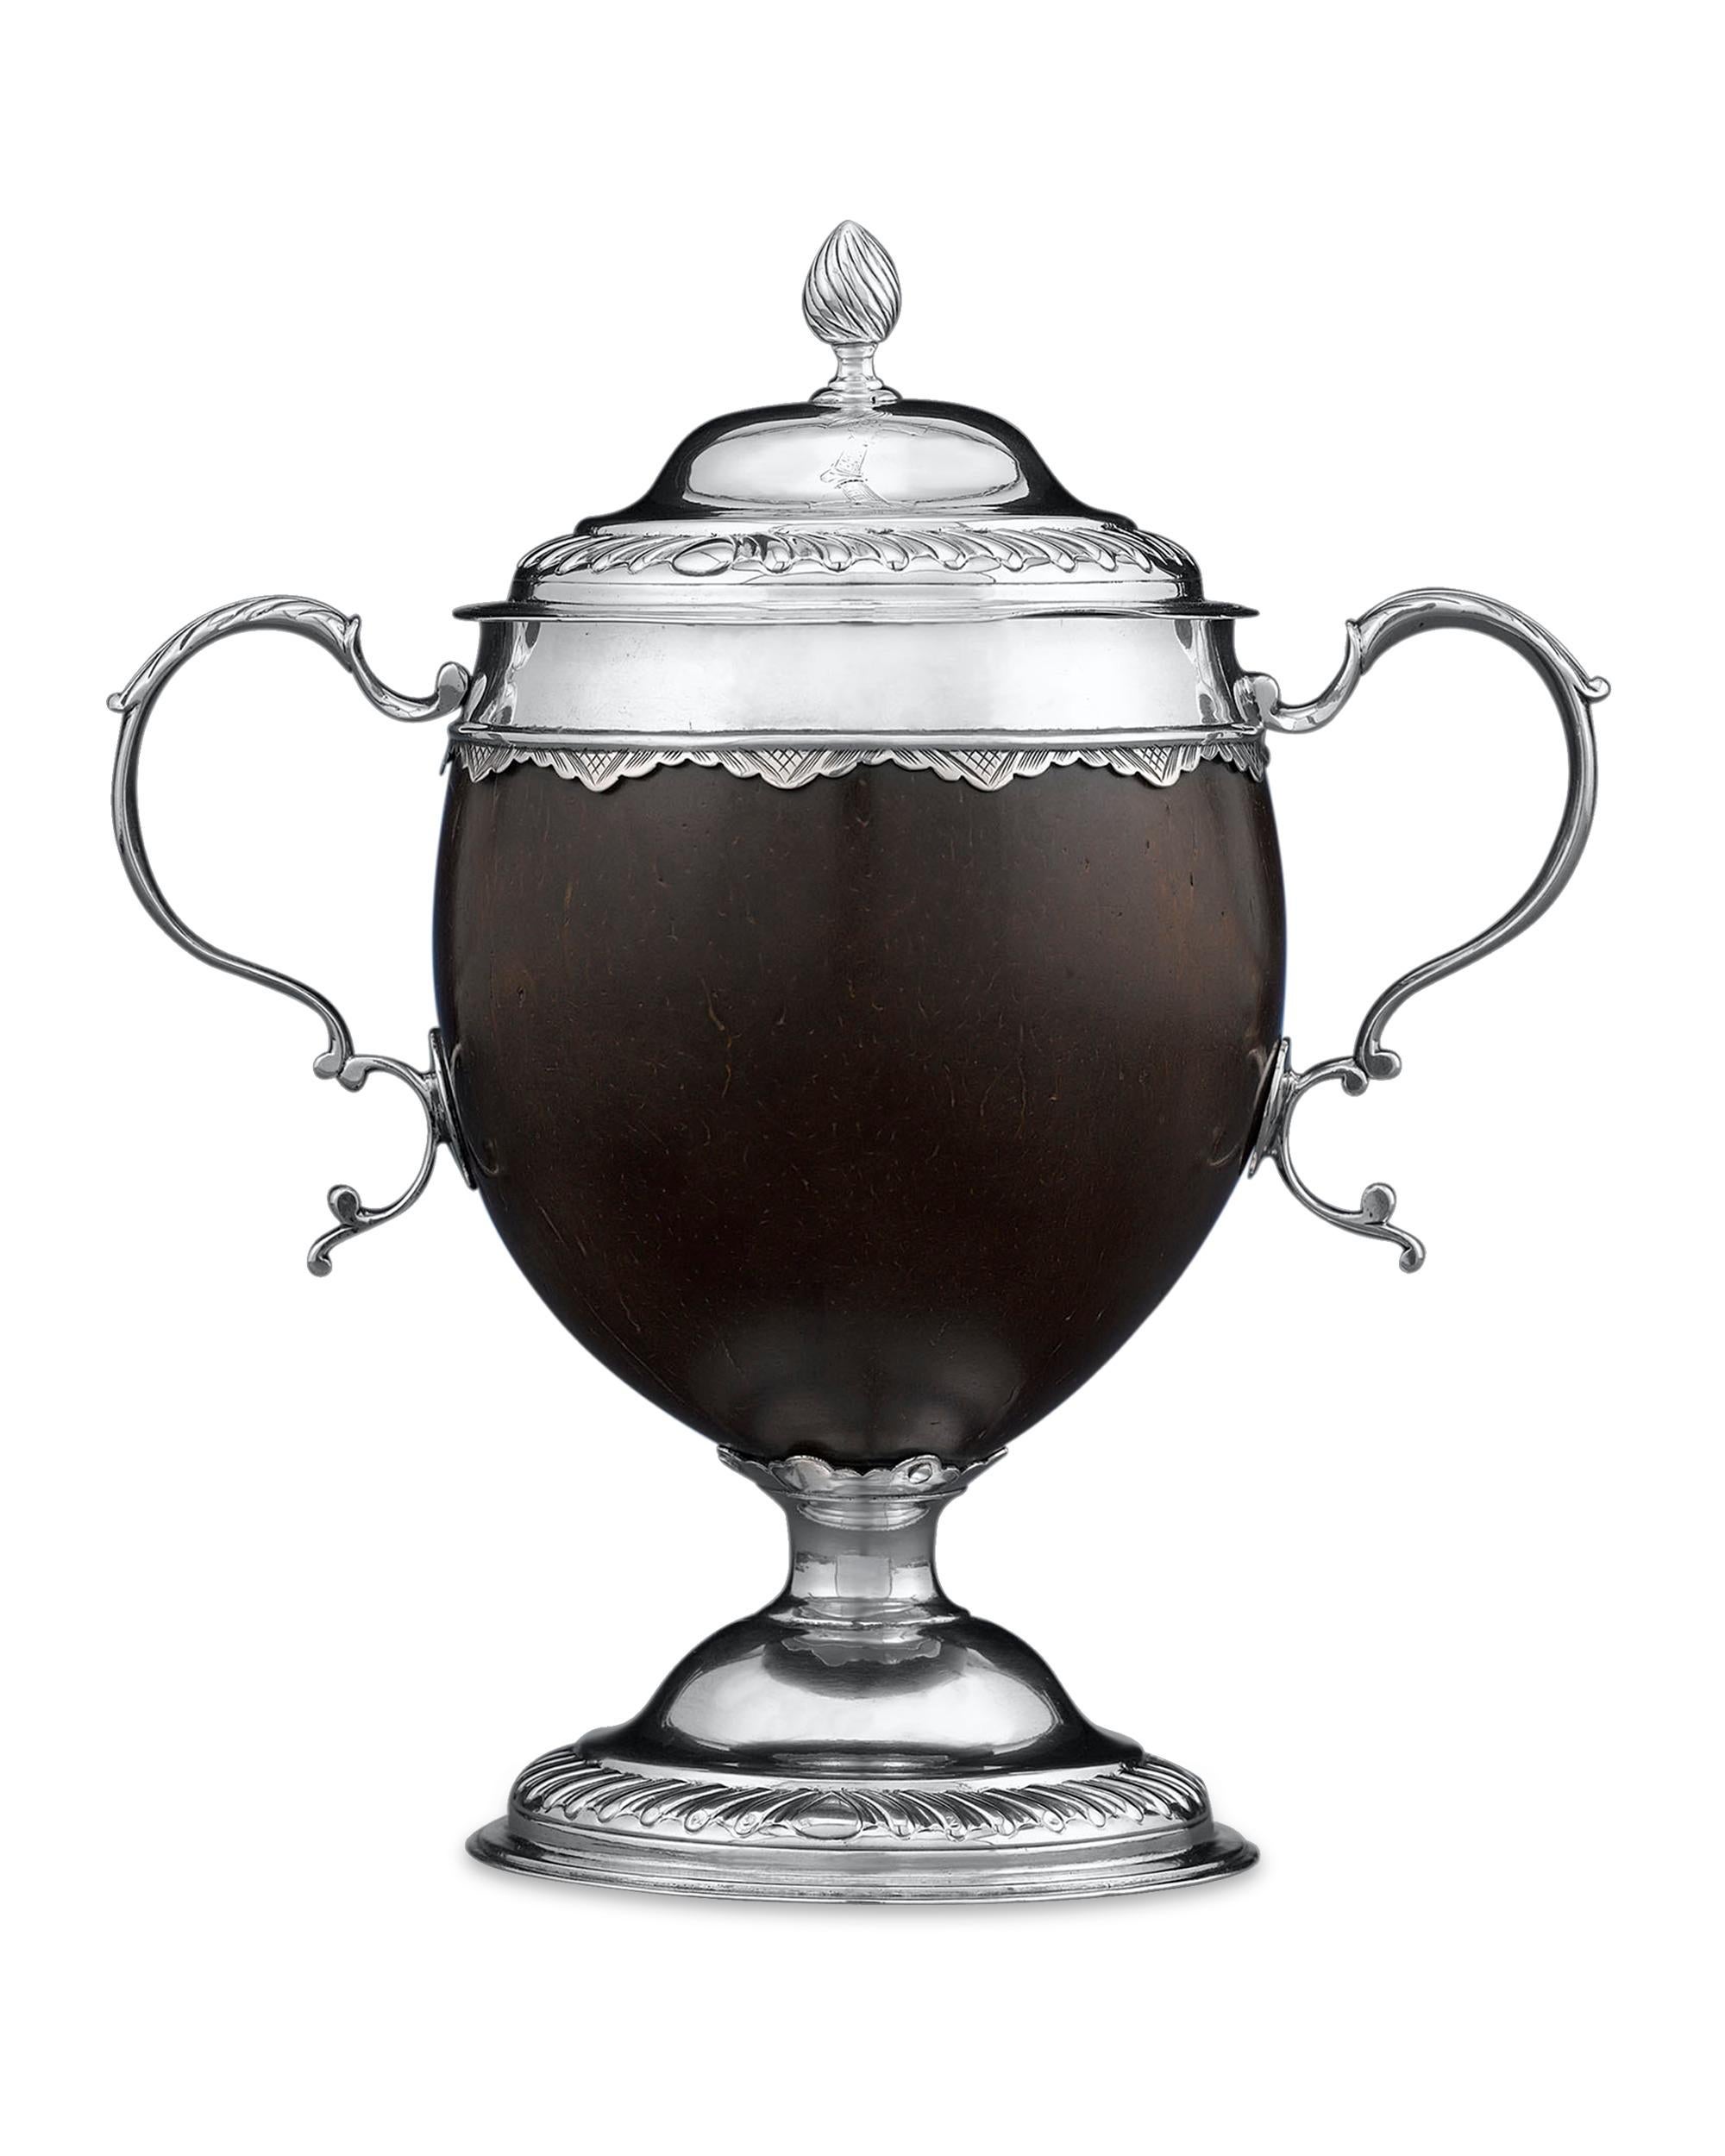 Exotic materials and classical design distinguish this rare, George III-period silver mounted coconut cup. Mounted sterling silver displaying classic Georgian decorative accents such as egg-and-dart borders, the polished shell is adorned with a